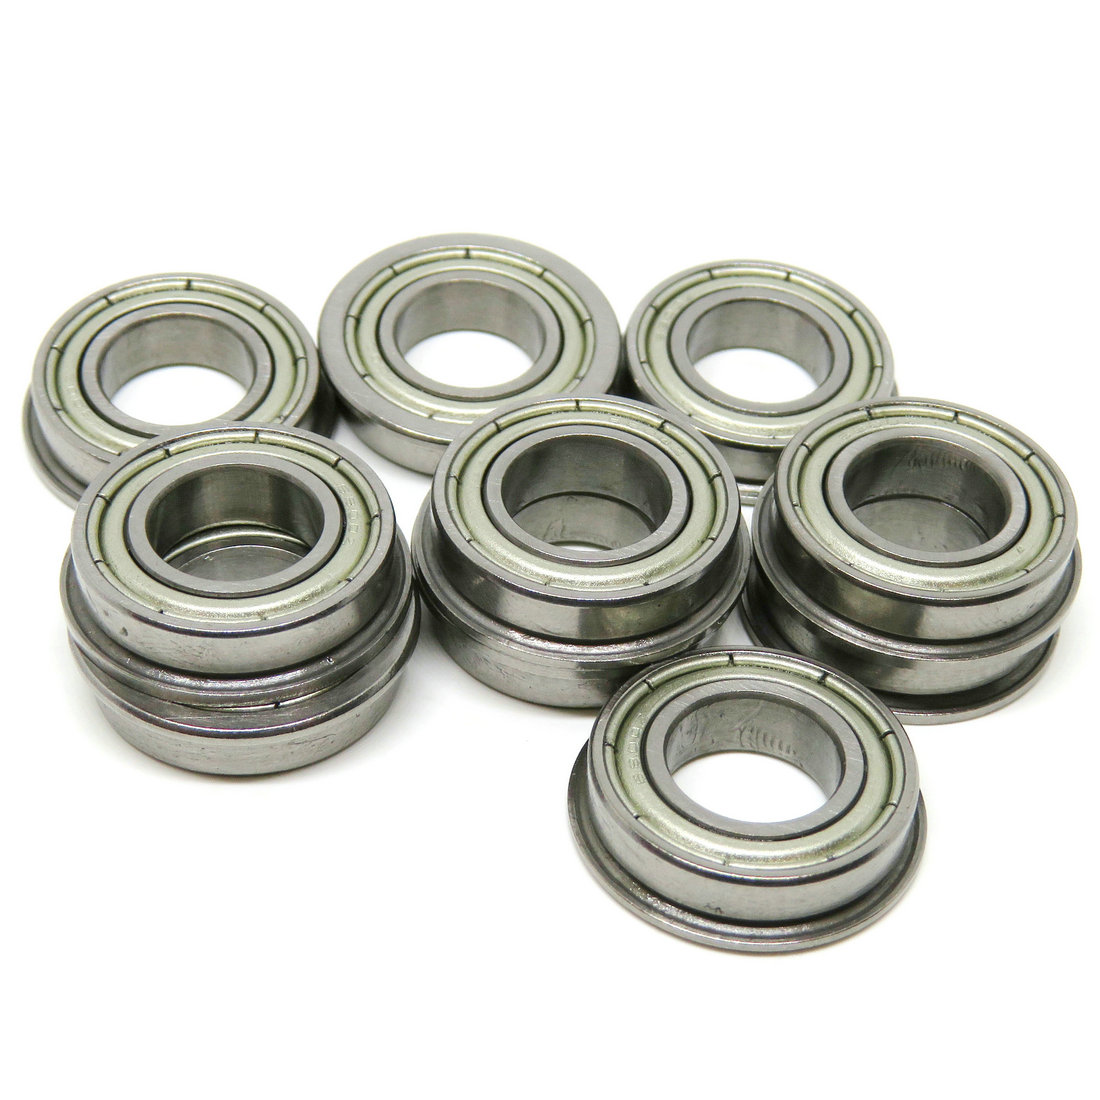 F6200 ZZ 10x30x9mm flange ball bearing F6200ZZ F6201 F6202 F6203 F6204 F6205 F6206 F6207Z for textile machinery bearing.jpg